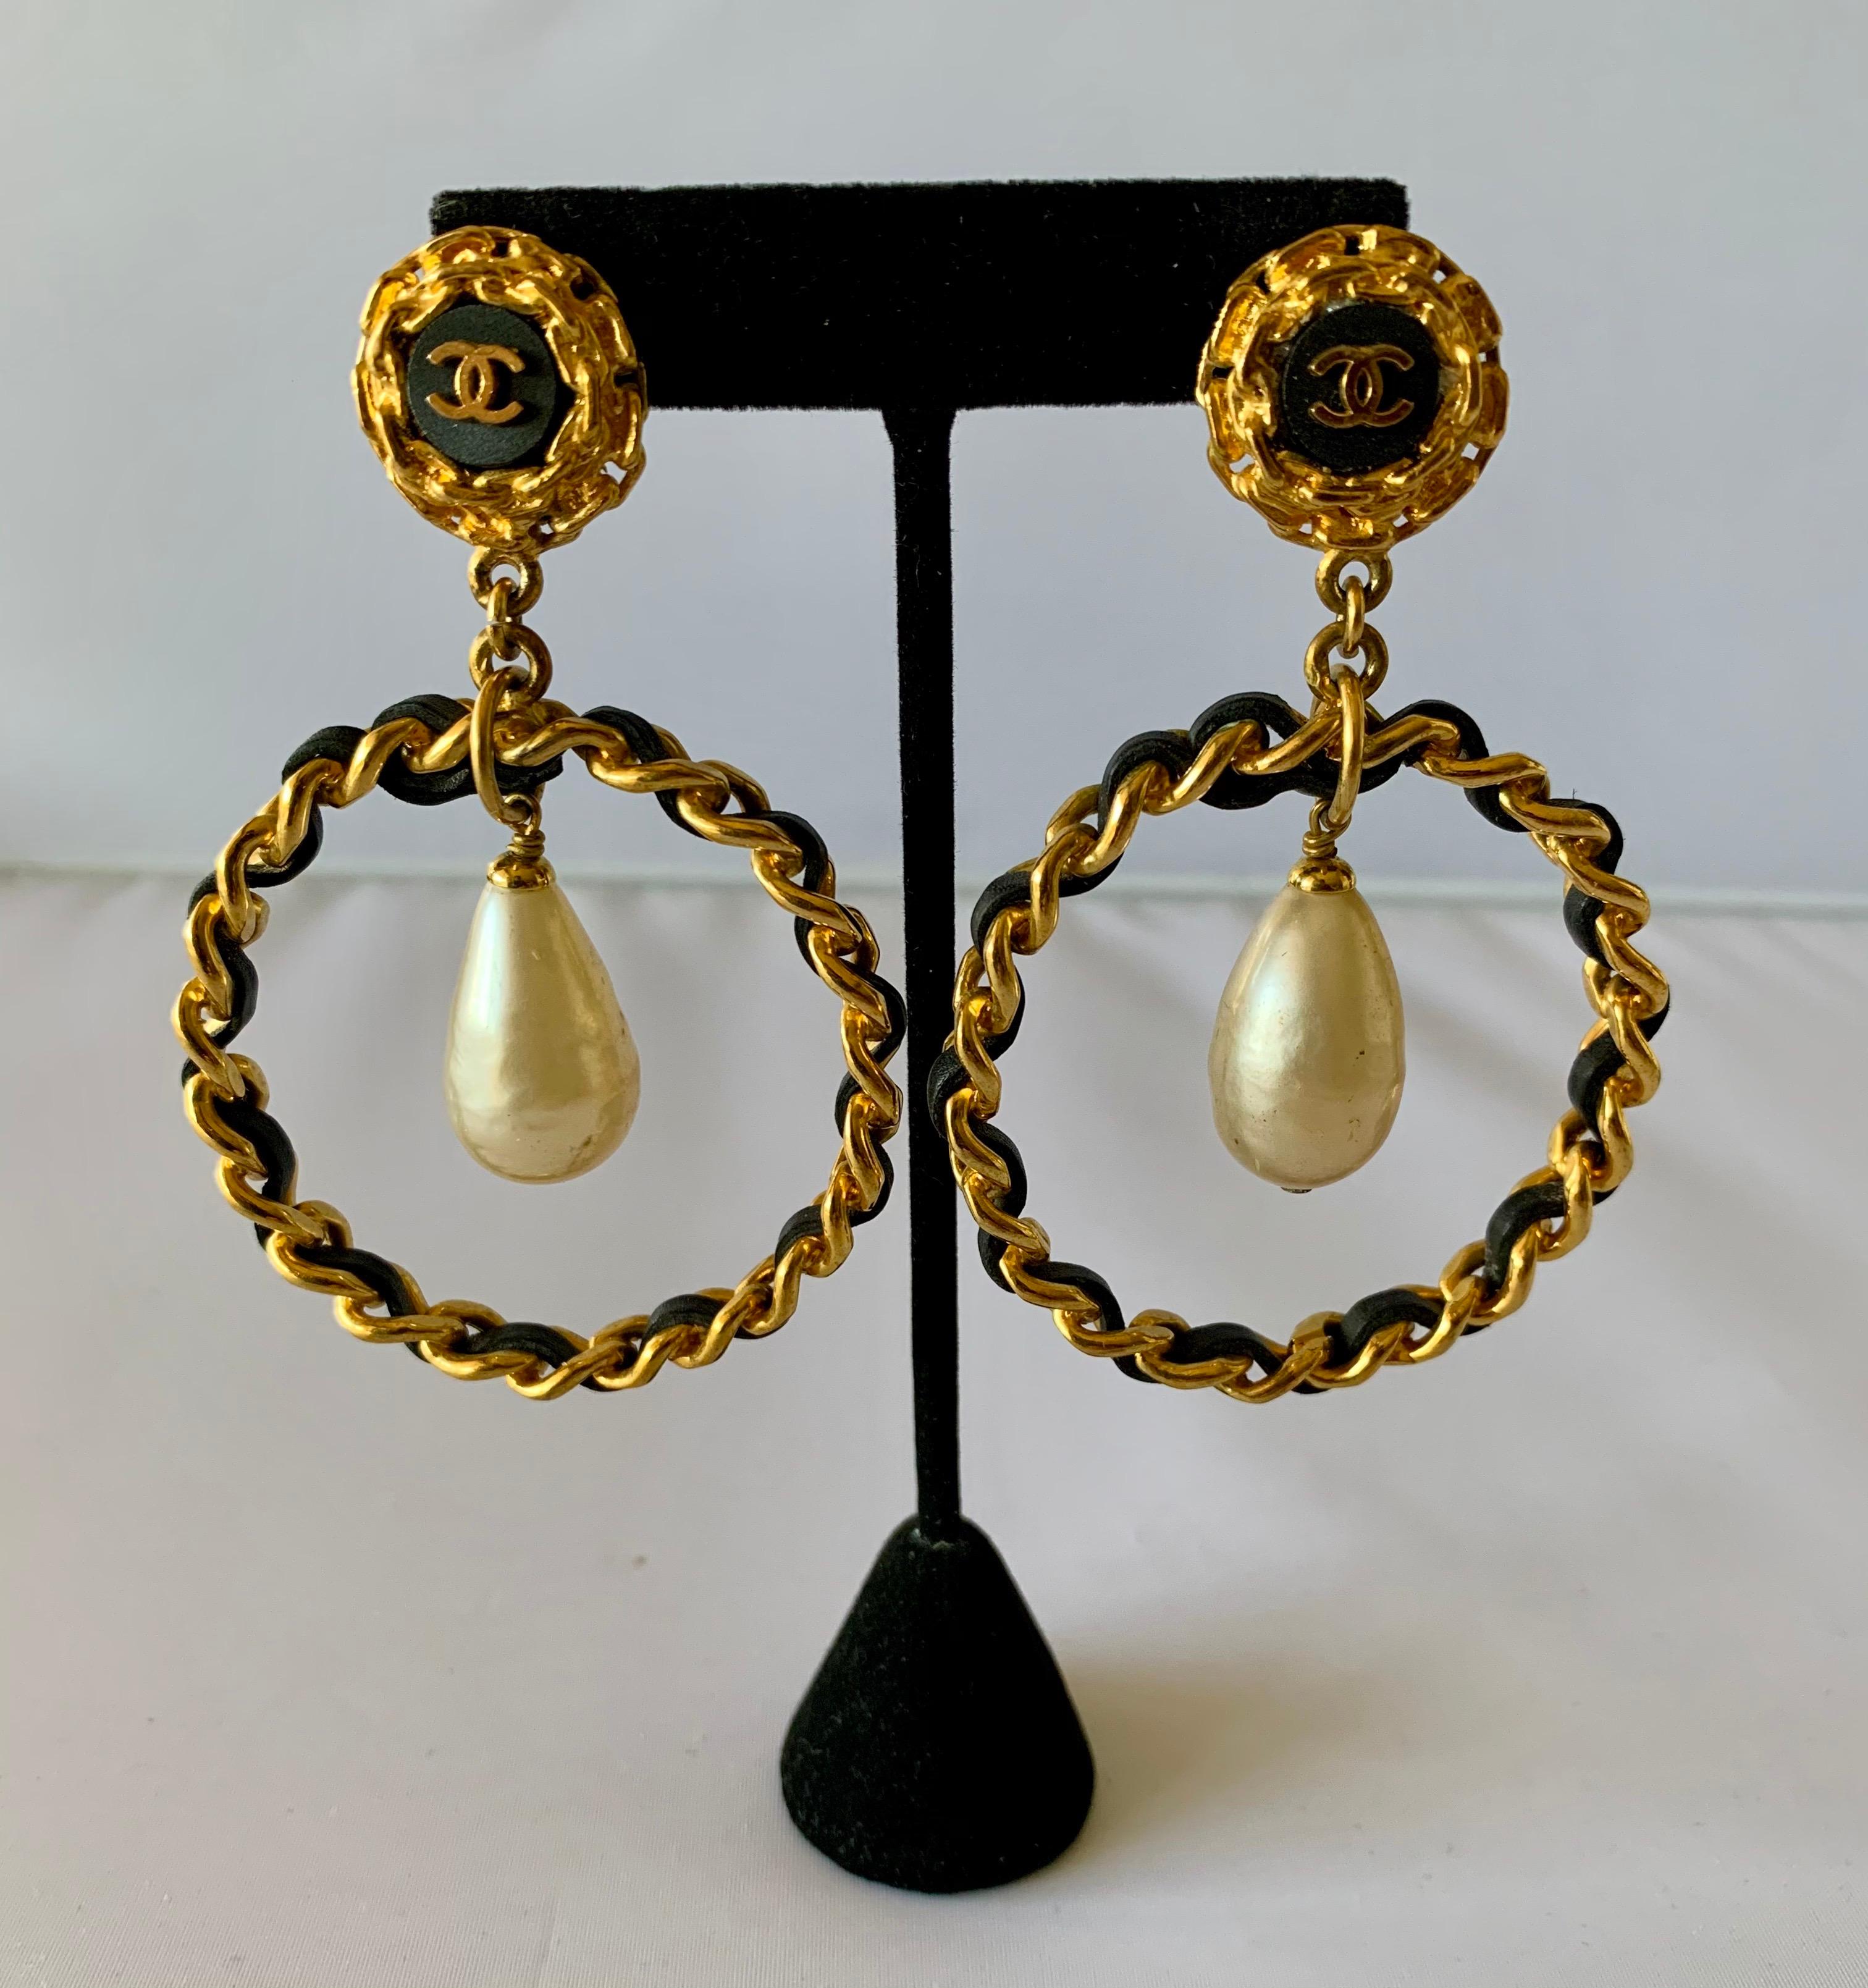 Vintage classic Chanel clip-on hoop statement earrings, comprised out of gold-tone metal and woven black leather the jumbo earrings feature the double cc Chanel logo and large accenting baroque 